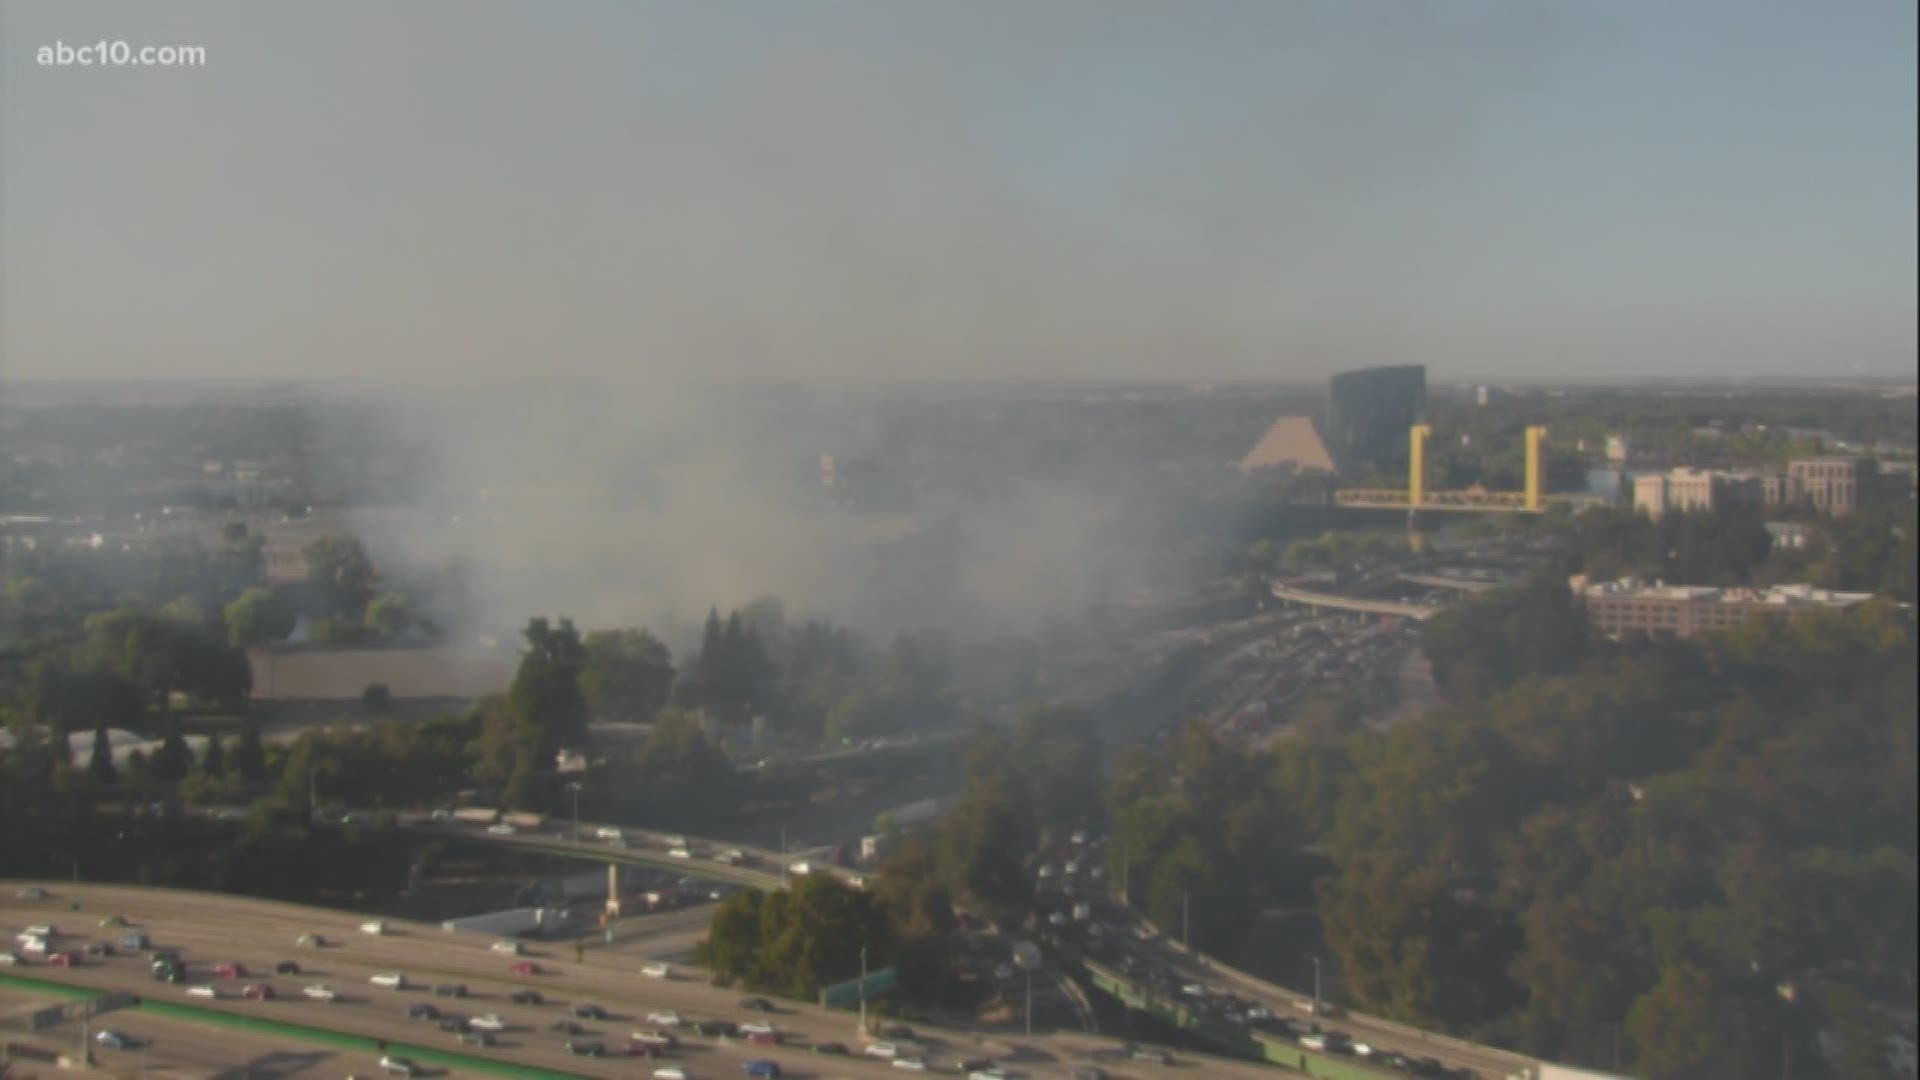 A large grass fire is causing a significant amount of smoke and traffic issues in the downtown Sacramento area Monday evening, according to the California Highway Patrol.